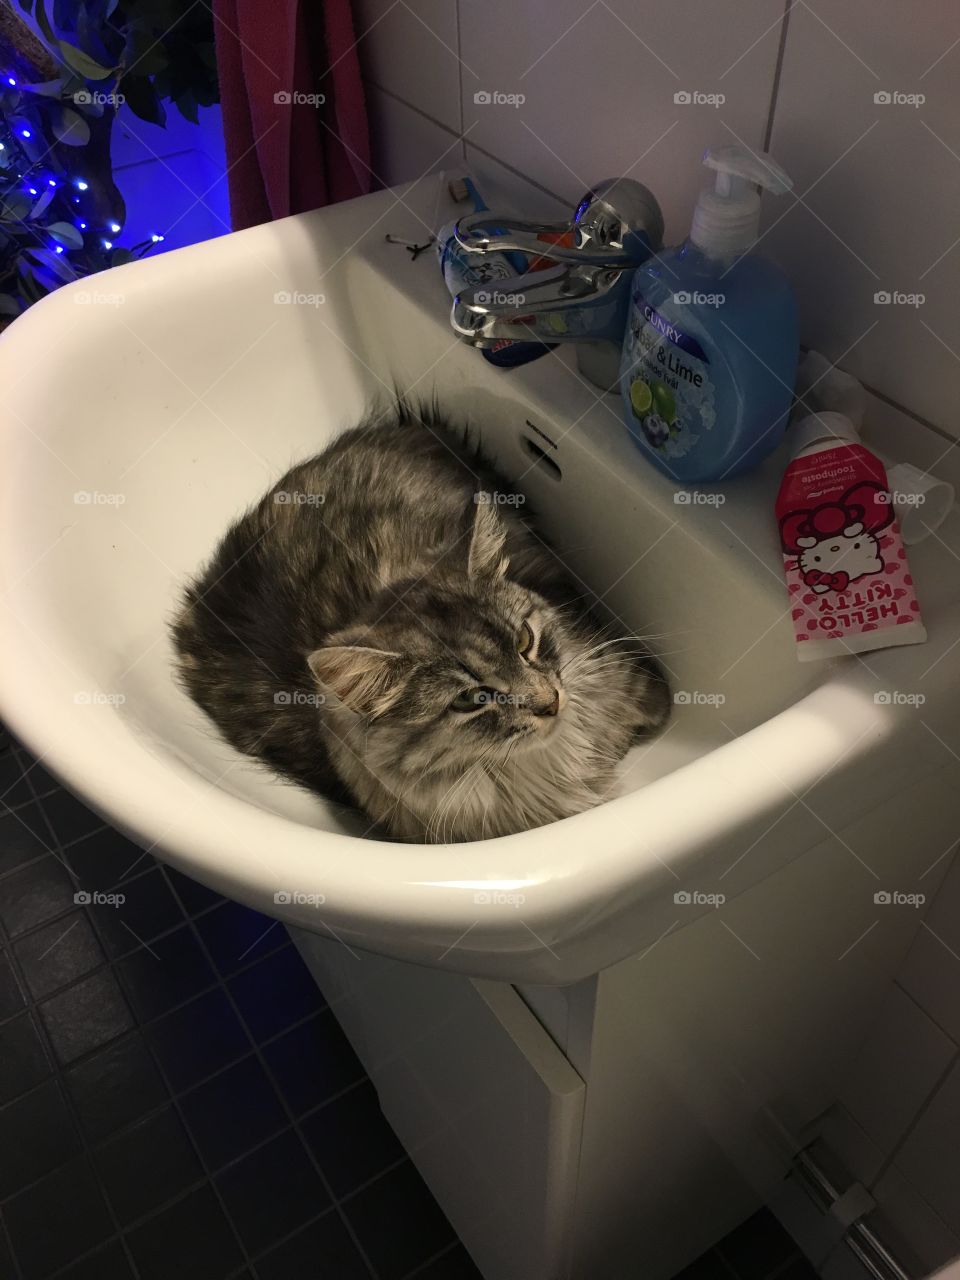 Maincoon cooling of